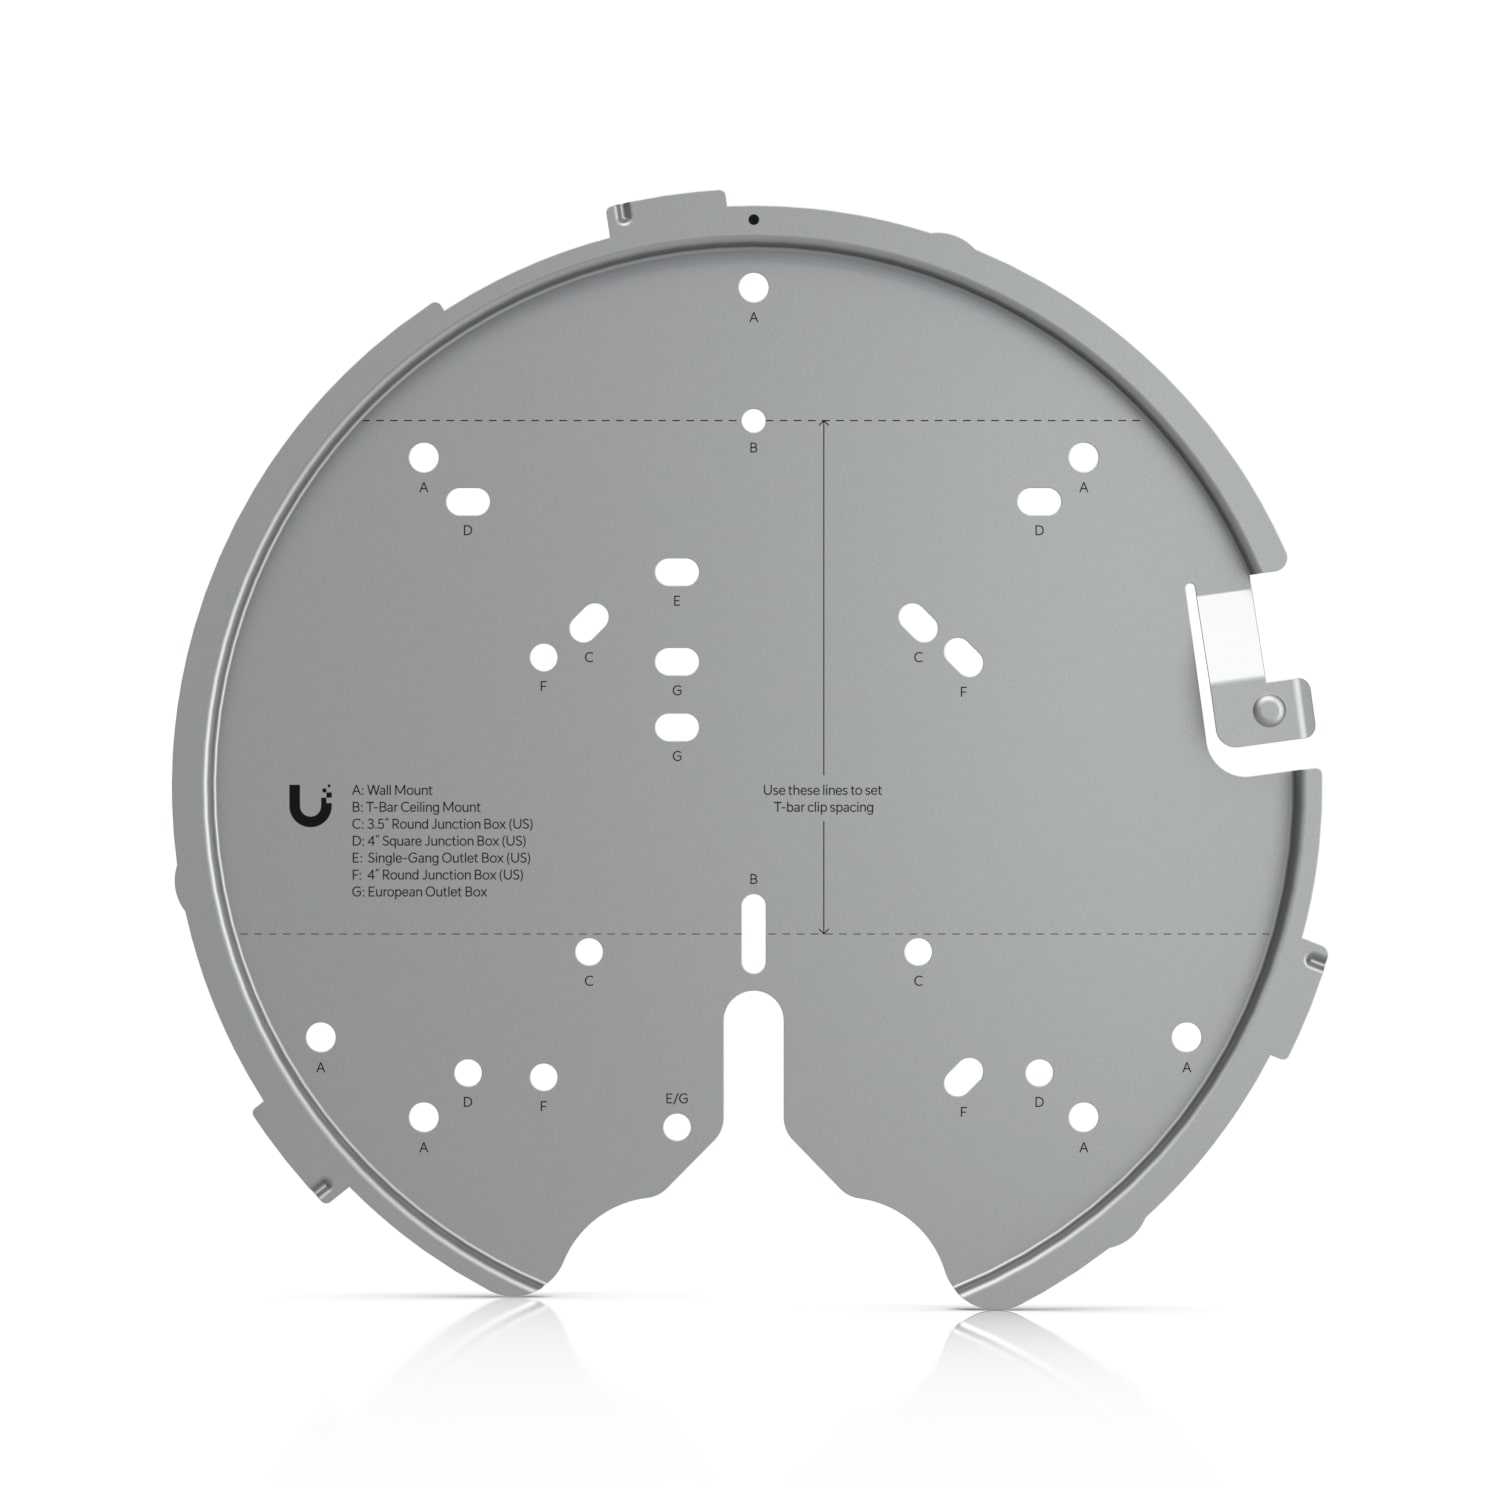 Ubiquiti Versatile mounting system for UAP-AC-PRO, UAP-AC-HD, UAP-AC-SHD, and above